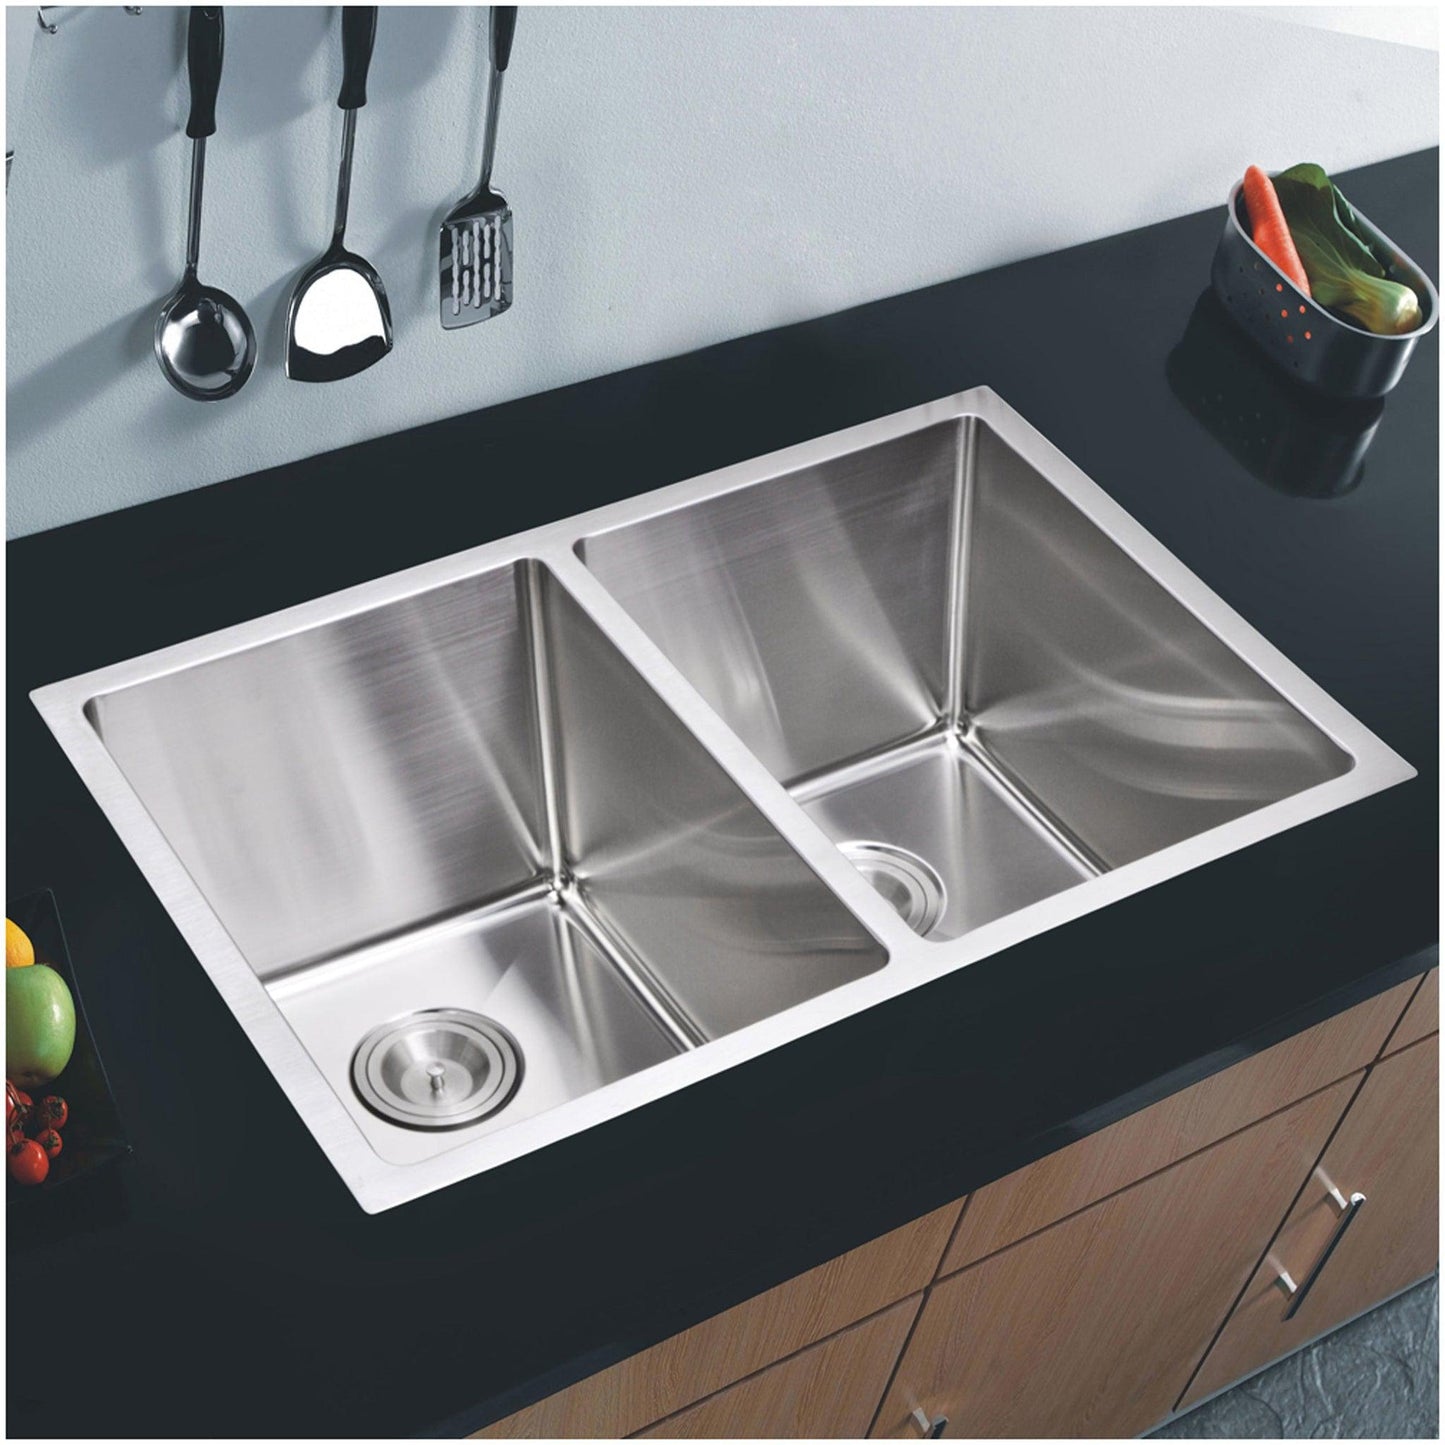 Water Creation 50/50 Double Bowl Stainless Steel Hand Made Undermount 31 Inch X 18 Inch Sink With Coved Corners, Drains And Strainers